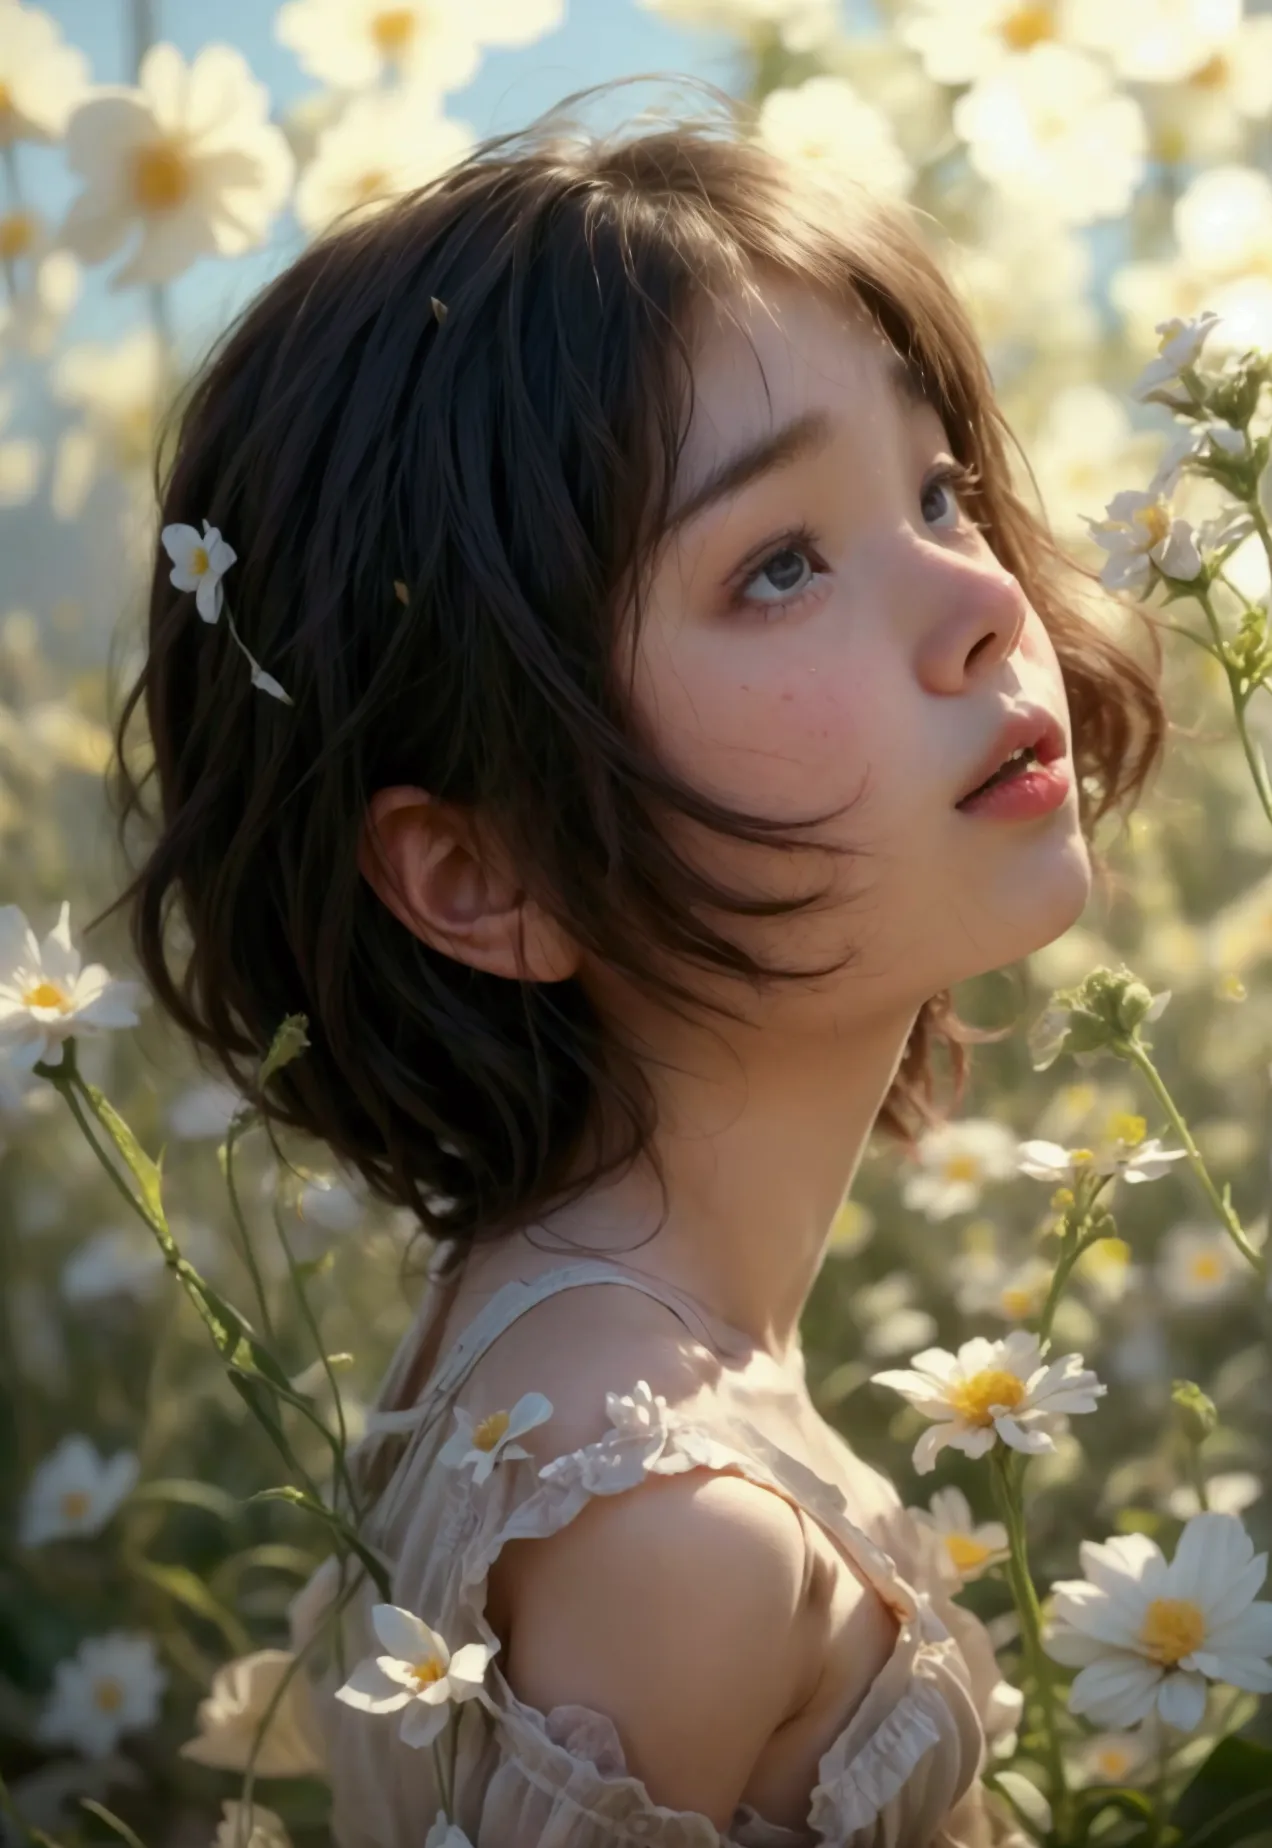 Cute girl surrounded by flowers、 Gravure Model、very 、Flat chest of a boy、Flower Field、Masterpiece: Same appearance and height as...